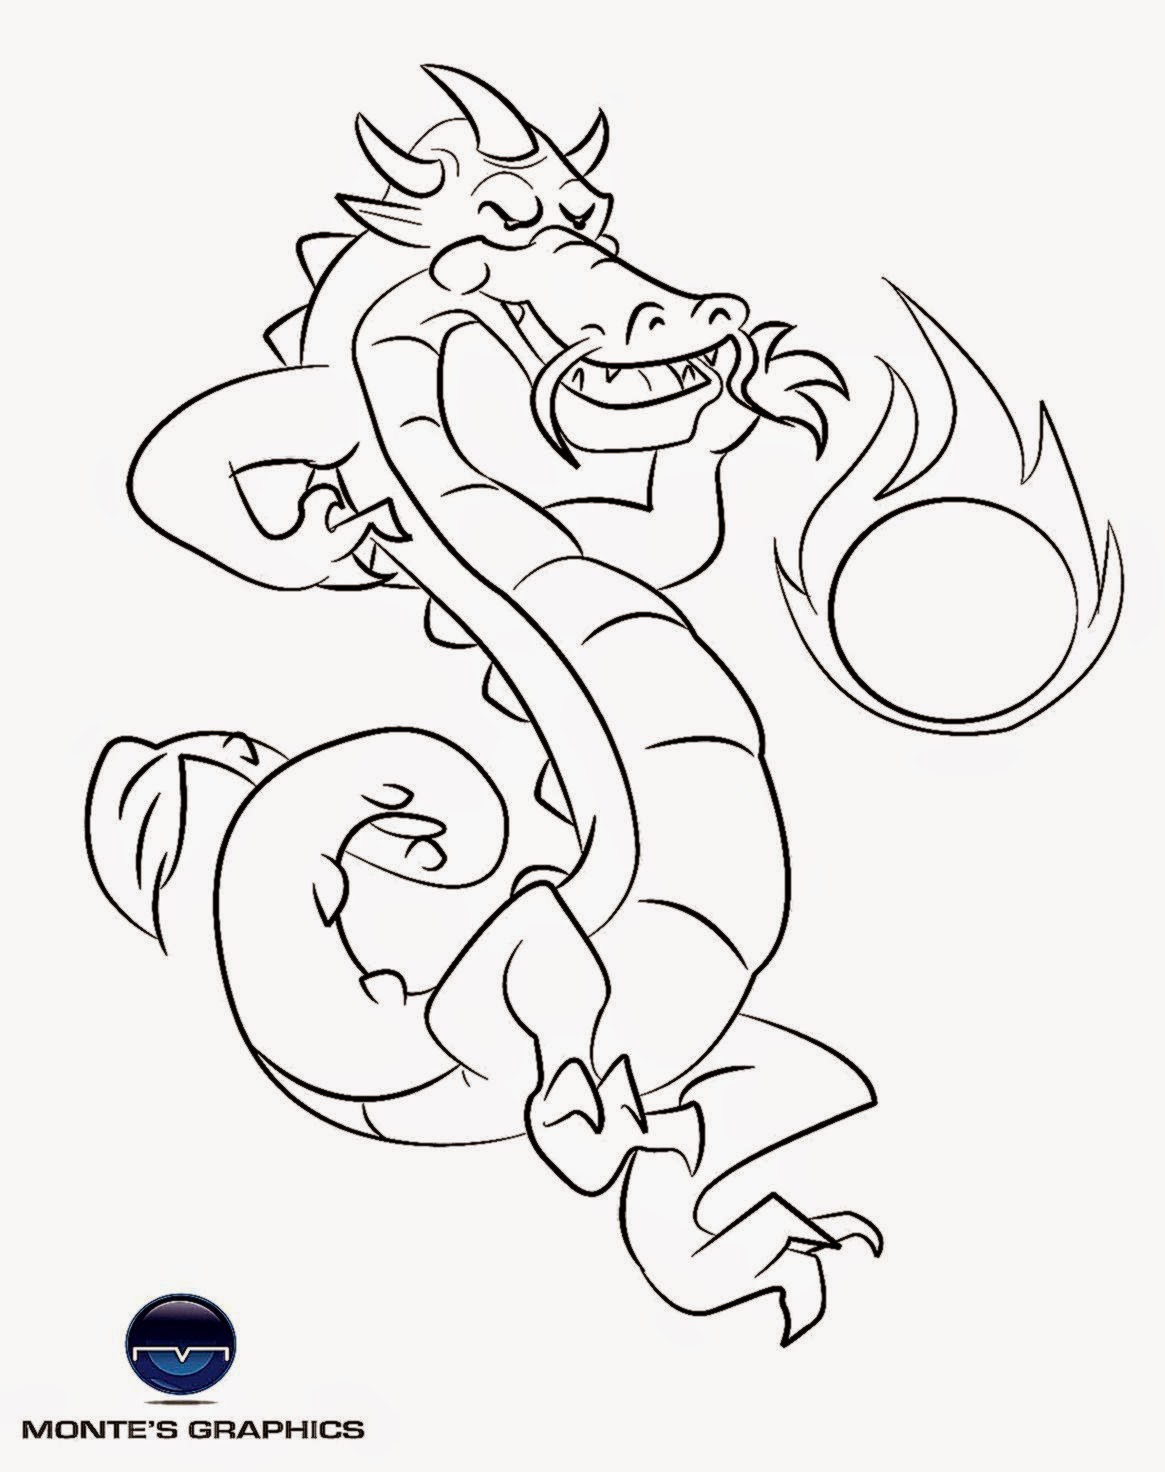 Coloring Pages for Kids Family Disney  - colouring sheets for kids